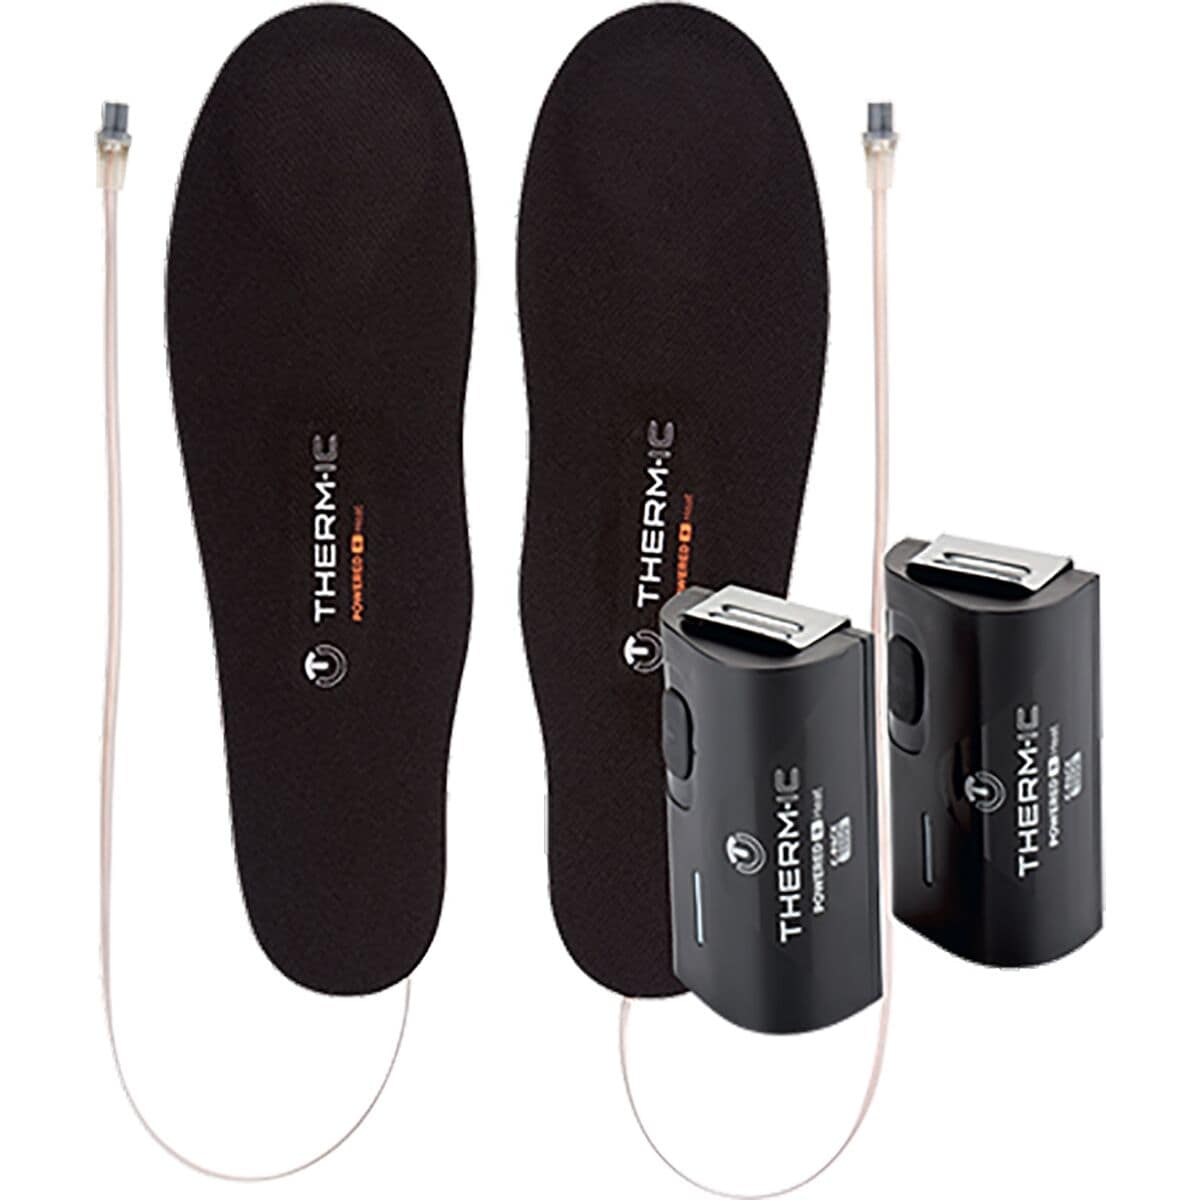 Therm-ic Insole Heat Flat + C-Pack 1300 Bluetooth